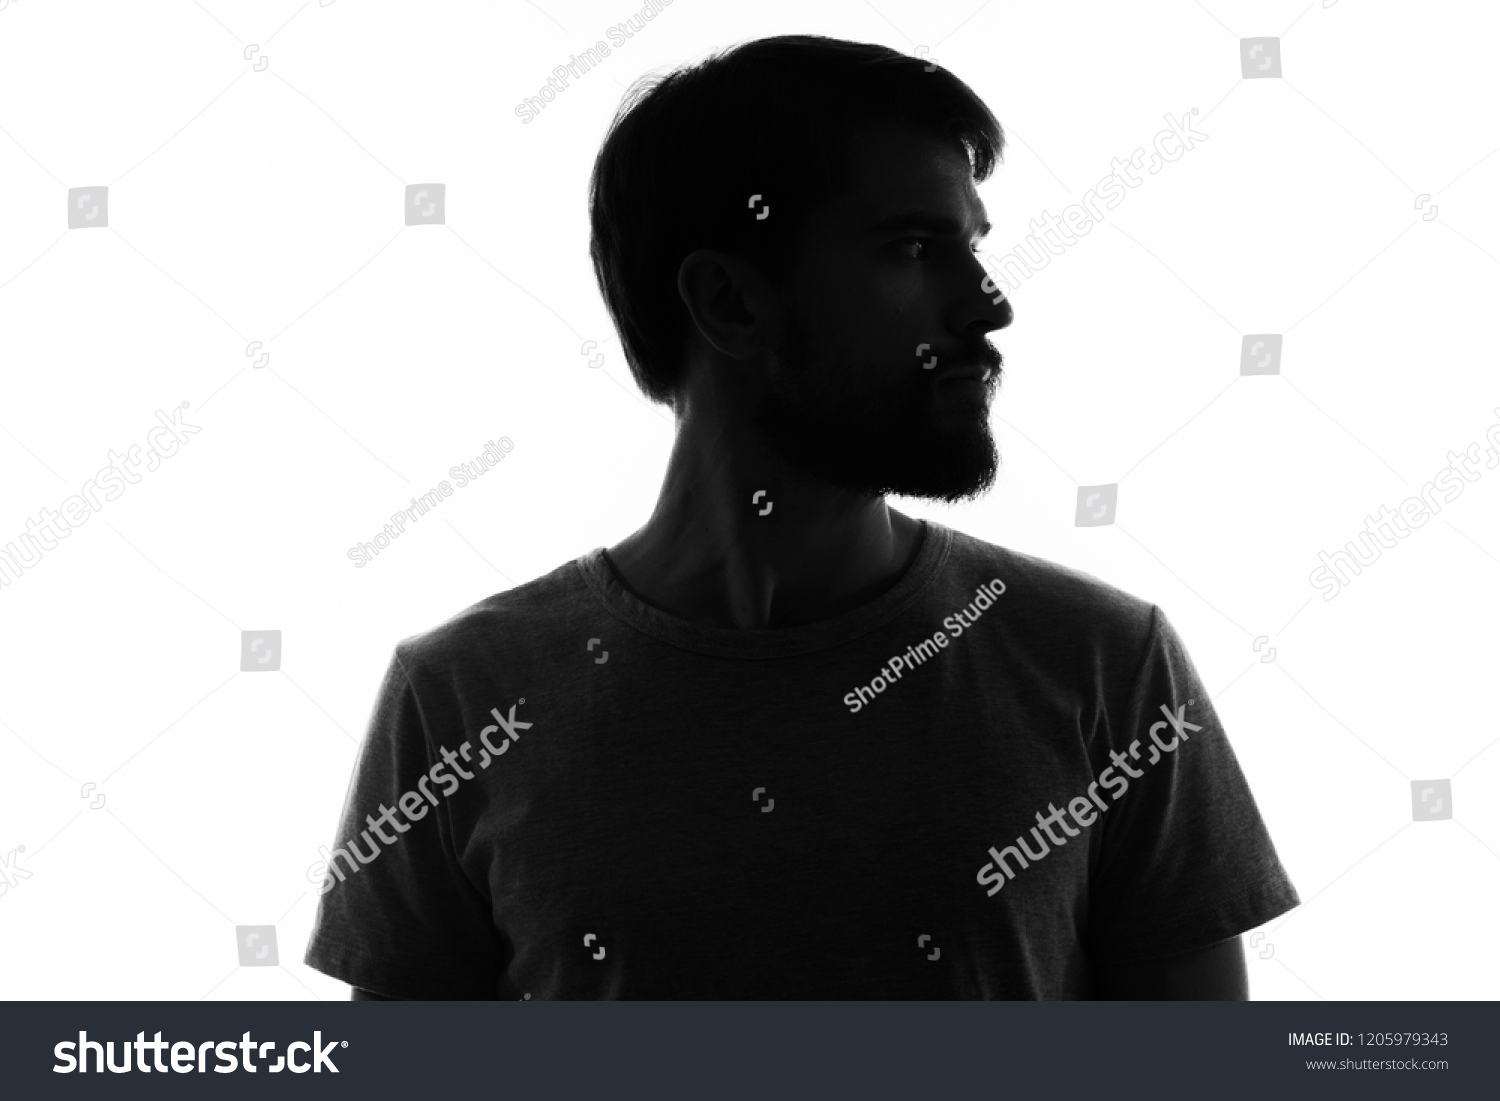 black silhouette of a man on a light background                                #1205979343